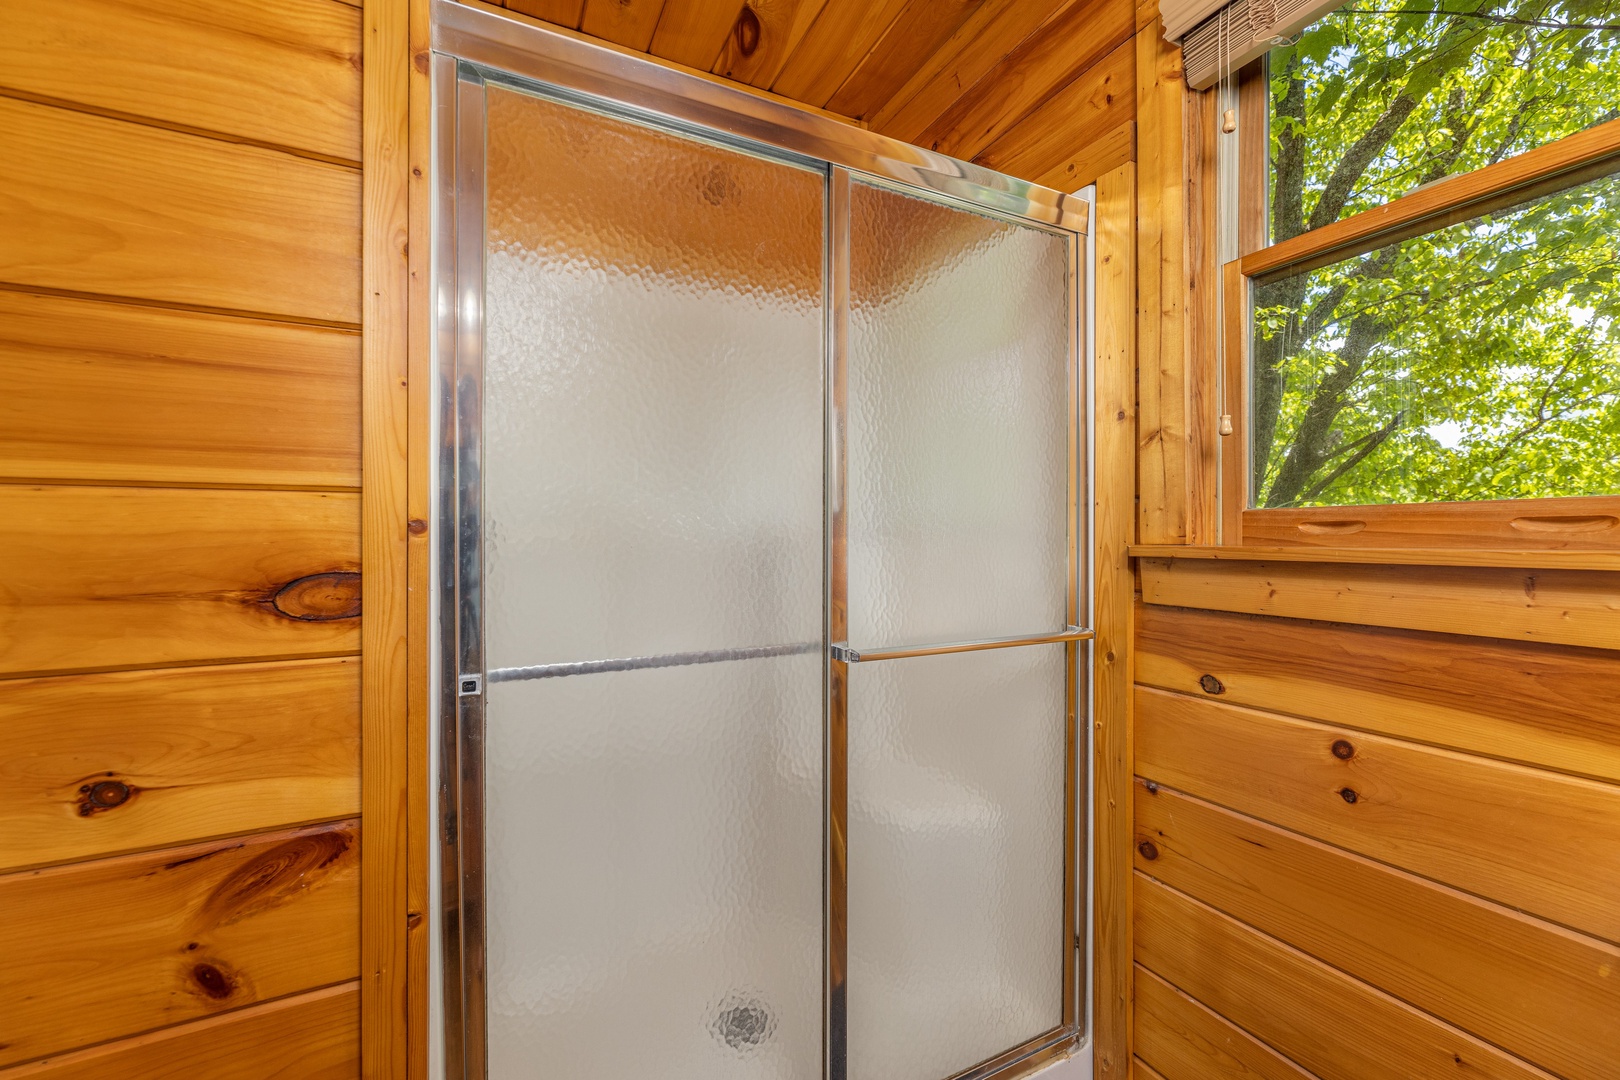 Bathroom with a shower at Moonlit Pines, a 2 bedroom cabin rental located in Pigeon Forge